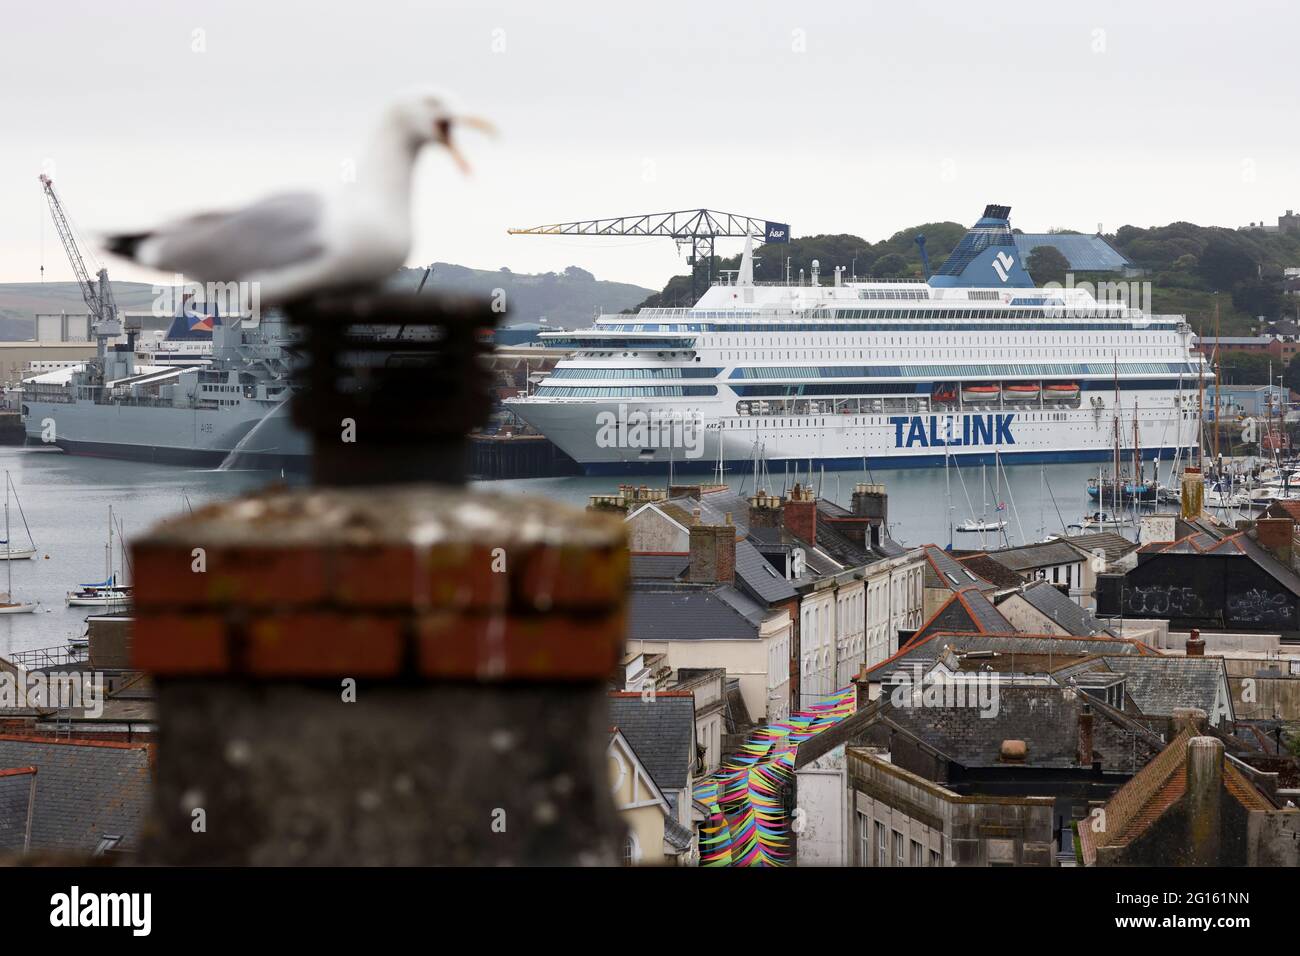 The cruise liner 'Silja Europa', which will host police officers during the G7 summit, is docked in Falmouth Harbour, Cornwall, Britain, June 5, 2021. REUTERS/Tom Nicholson Stock Photo